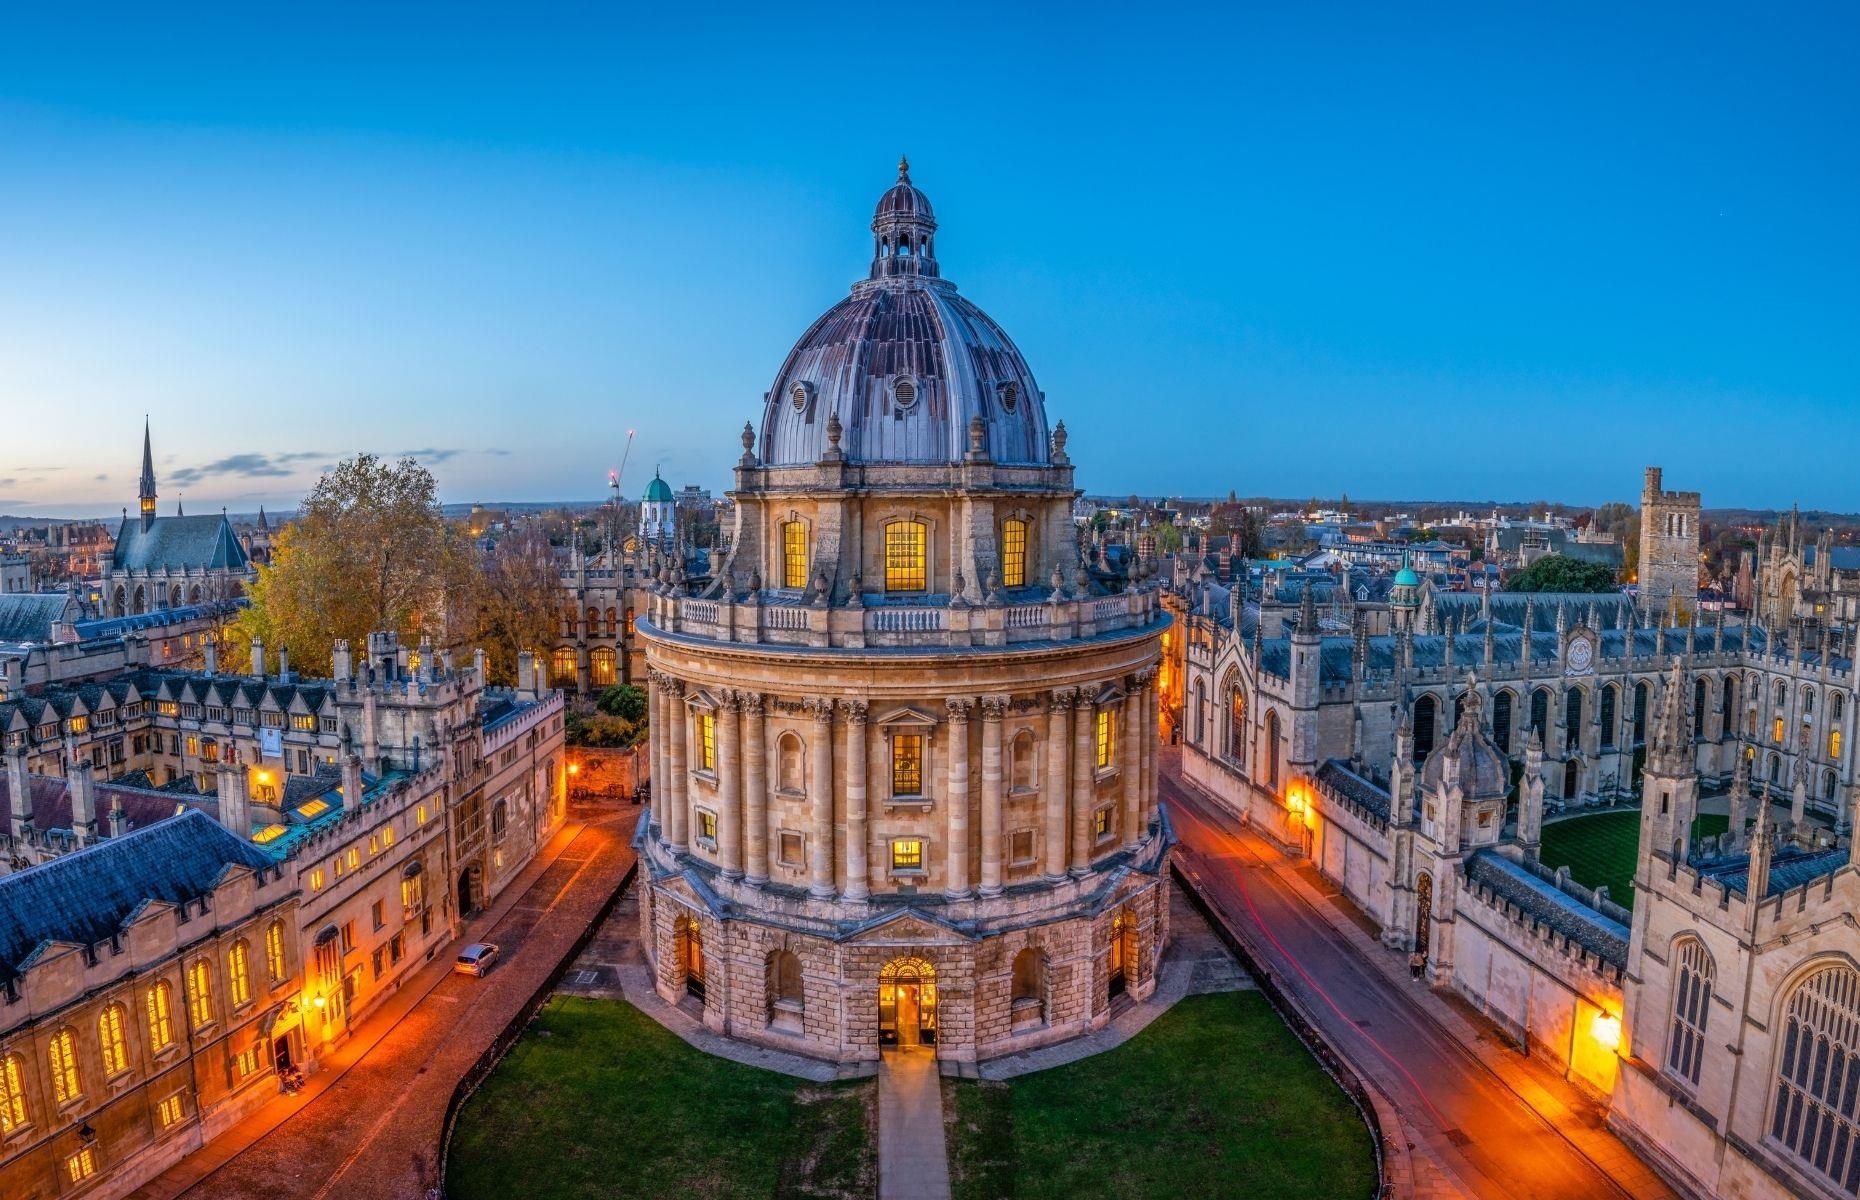 <p>One of the world's most iconic education universities, <a href="https://www.ox.ac.uk/">Oxford</a> has a storied history and a truly spectacular campus. Positioned in the heart of Oxford, it's thought to have been in operation since 1096: that makes it the oldest university in the English-speaking world. Often topping the World University Rankings, this incredible institution is famous for its historic buildings (like Radcliffe Camera, pictured), which typically attract millions of tourists every single year. In fact, the university owns 67 listed buildings across the city.</p>  <p><strong><a href="https://www.loveexploring.com/news/72568/the-top-things-to-do-in-oxford-attractions">Discover what else to see in the city here</a></strong></p>